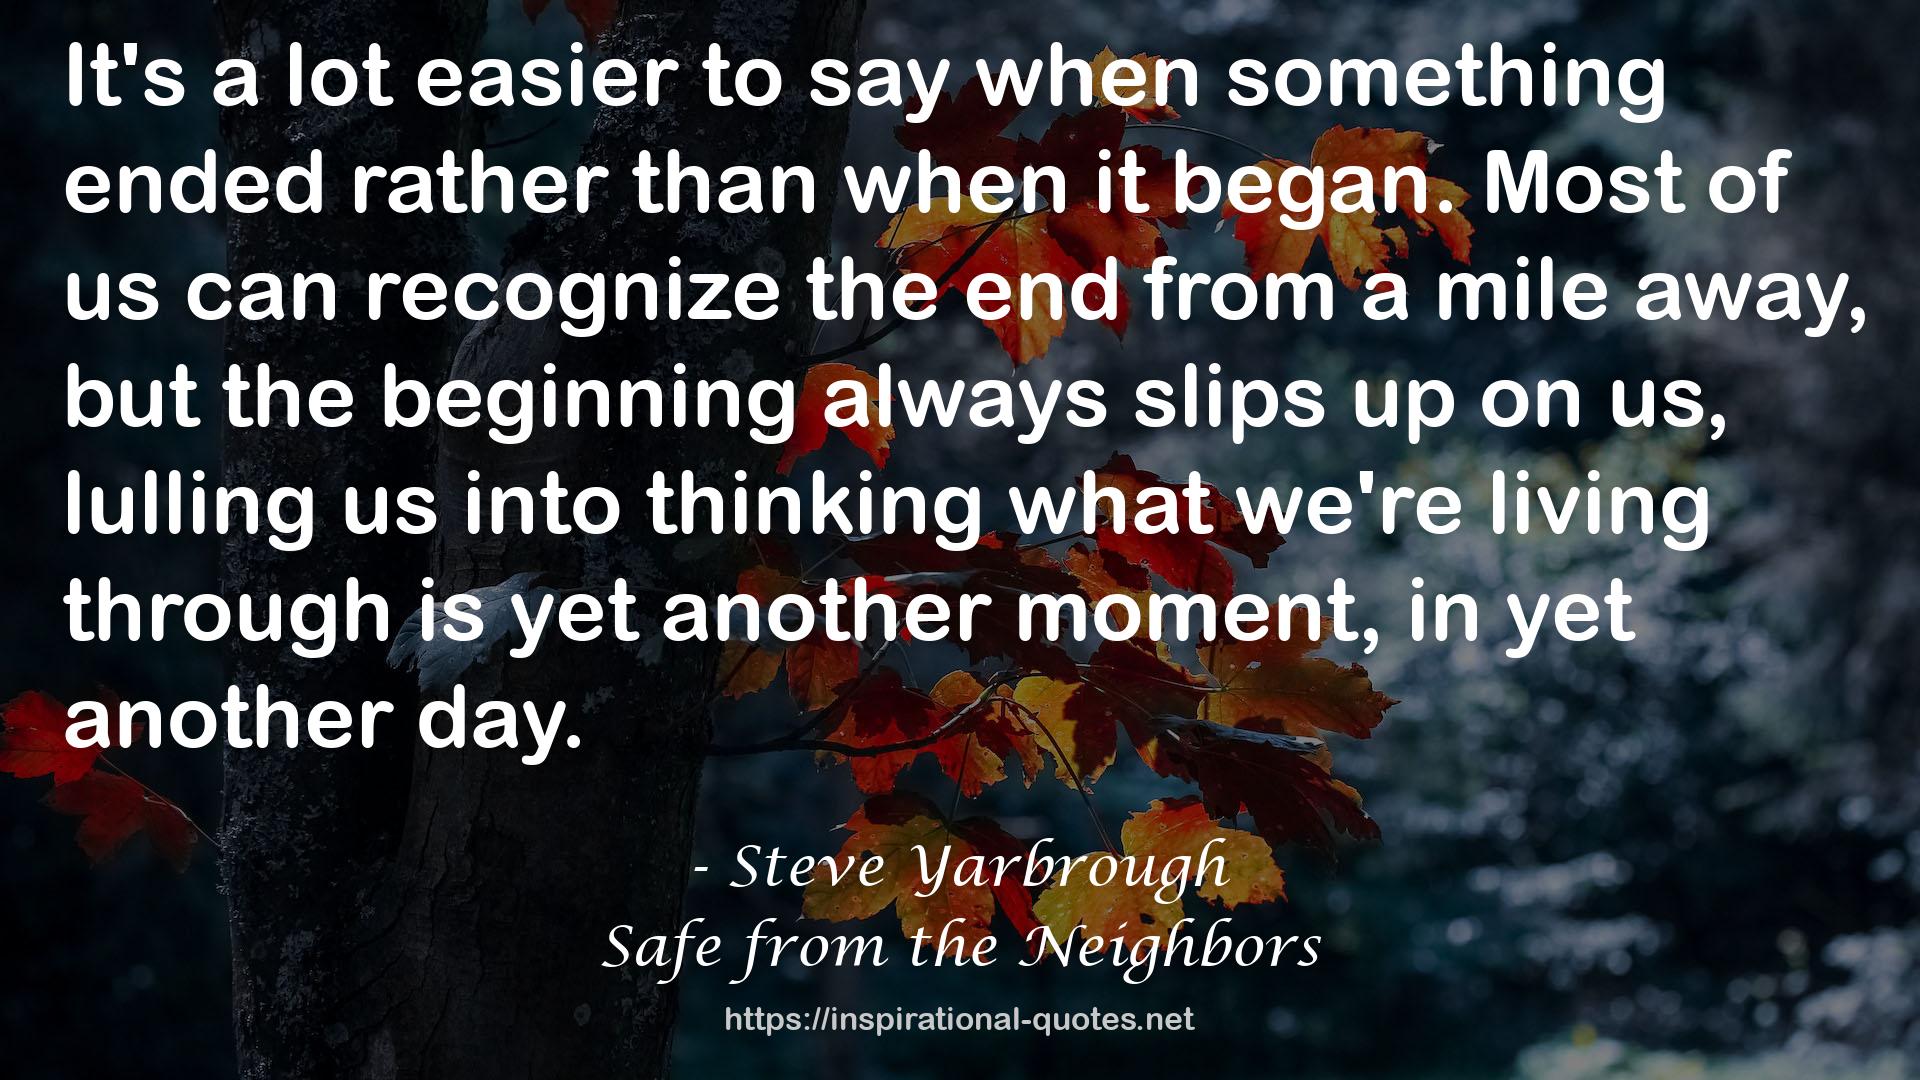 Safe from the Neighbors QUOTES